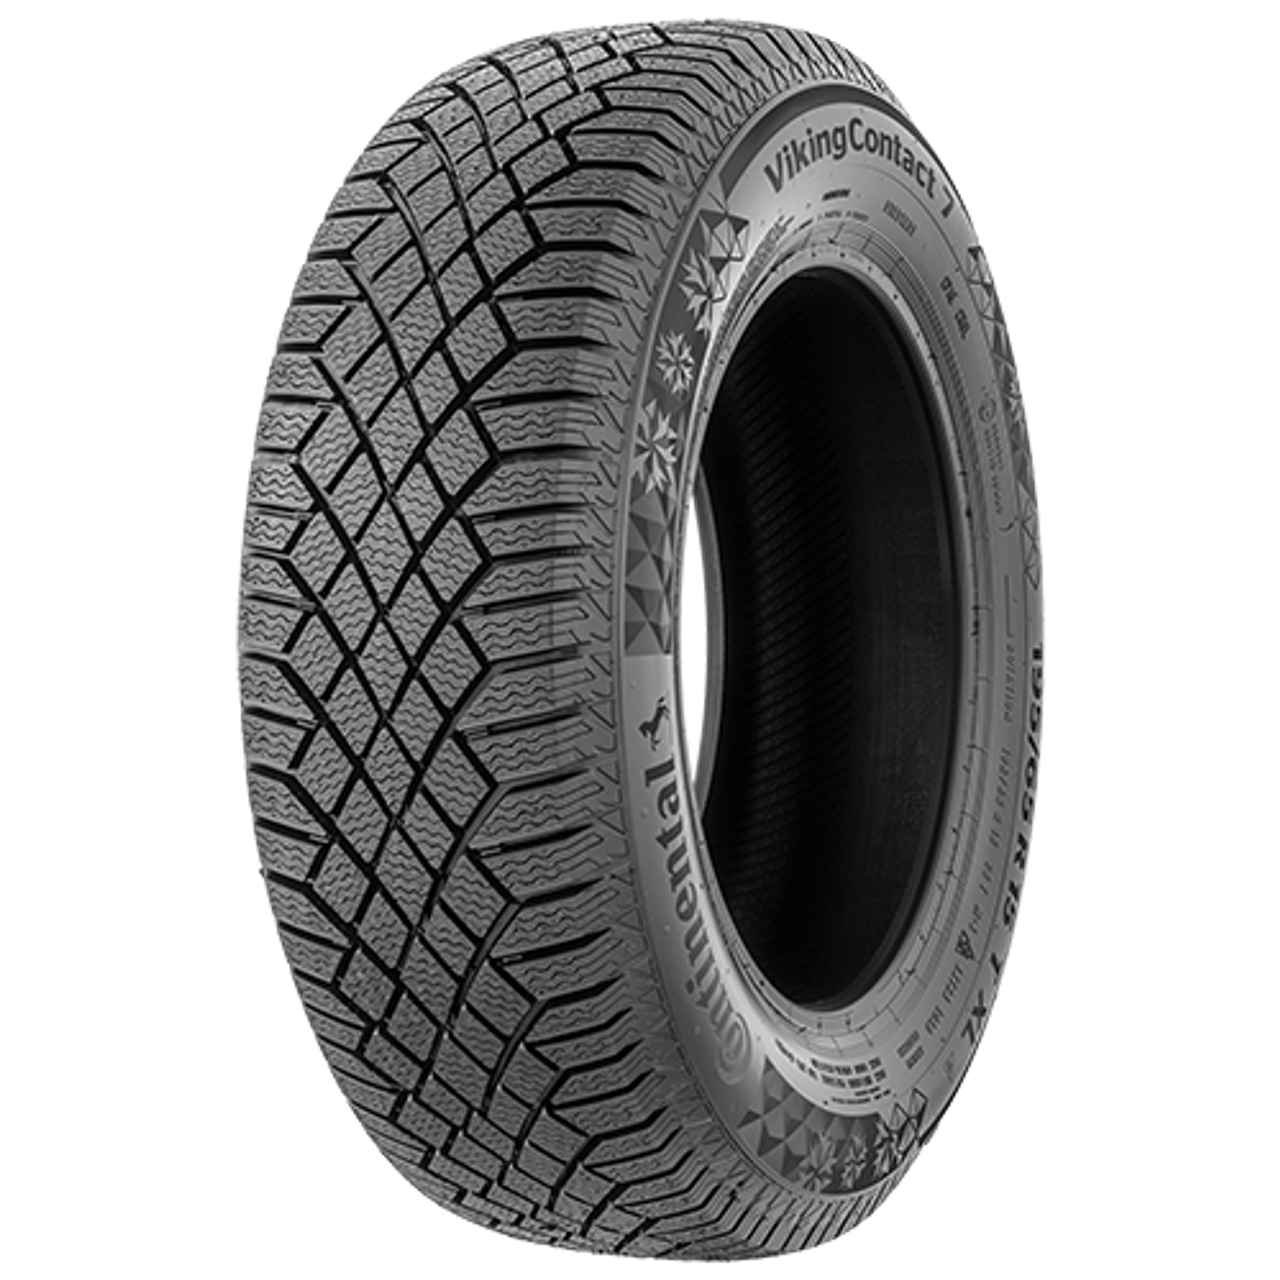 CONTINENTAL VIKINGCONTACT 7 195/60R16 93T NORDIC COMPOUND BSW XL